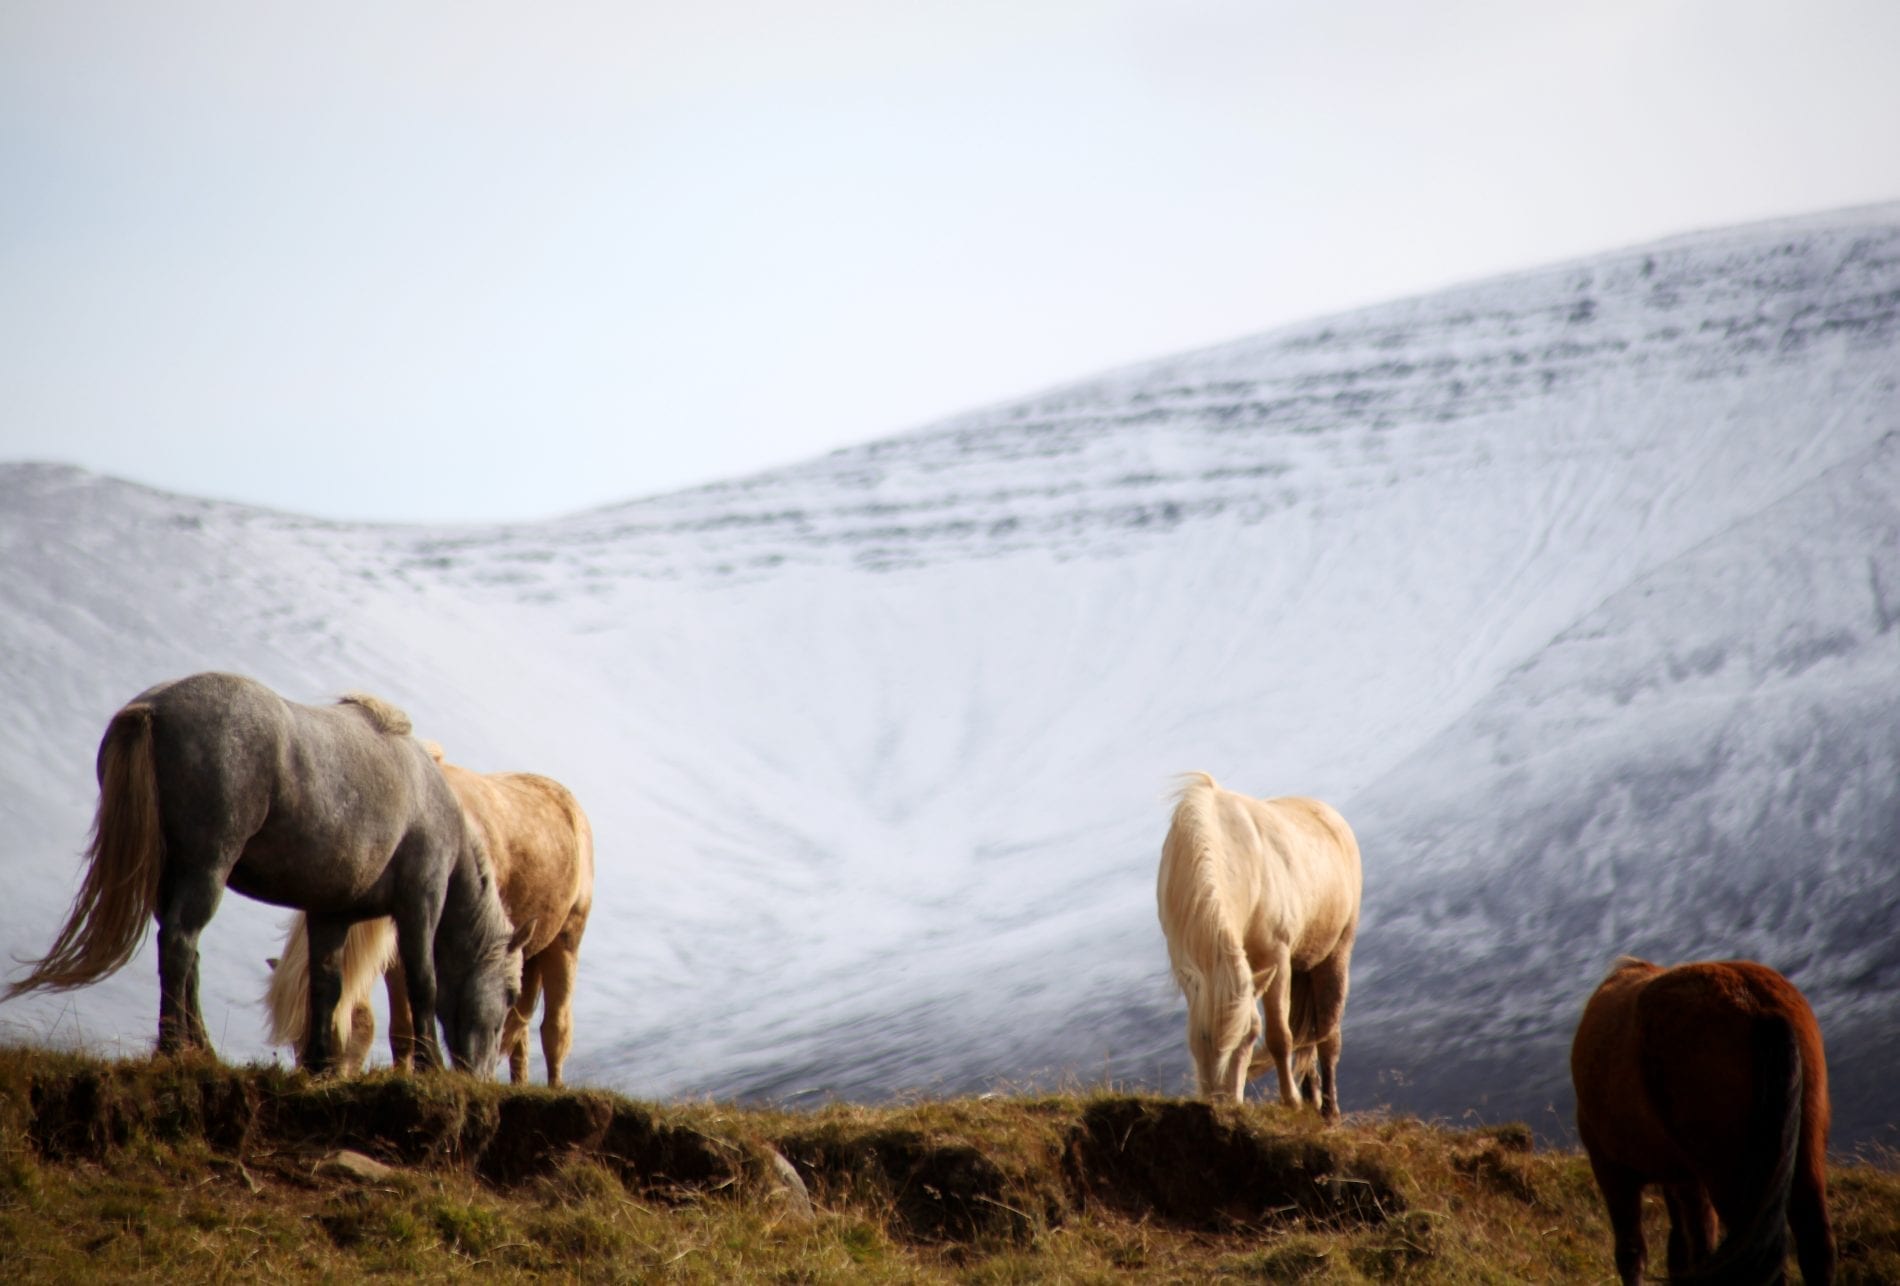 Horses biting grass in the foreground of a snowy mountain